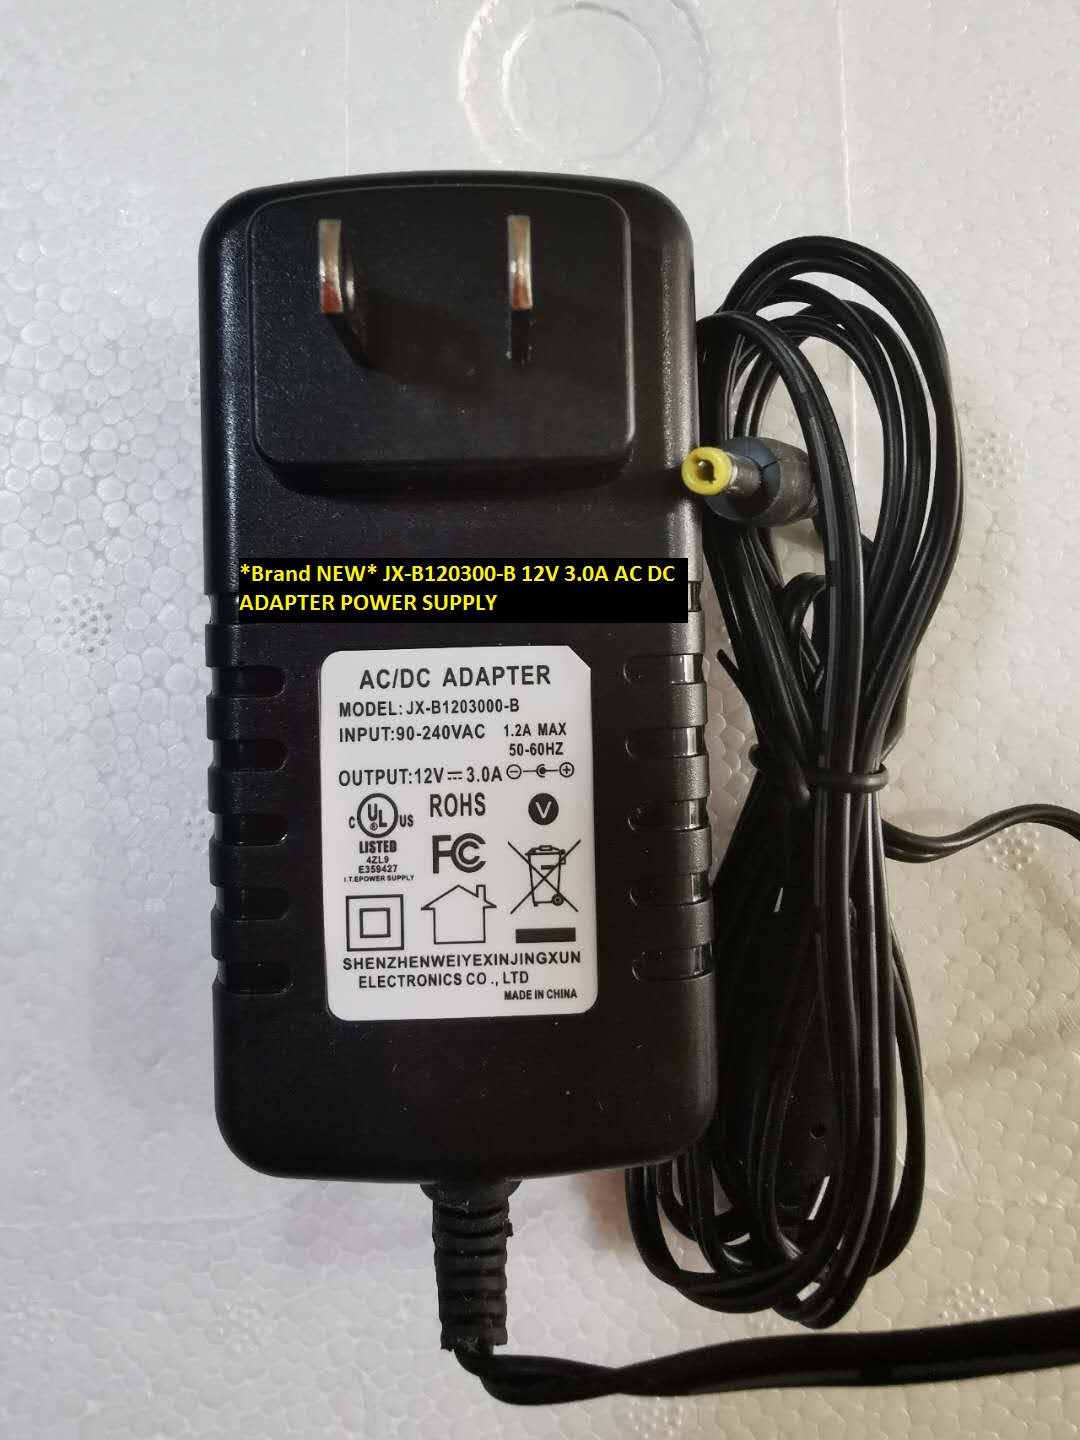 *Brand NEW* 12V 3.0A JX-B120300-B AC DC ADAPTER POWER SUPPLY - Click Image to Close